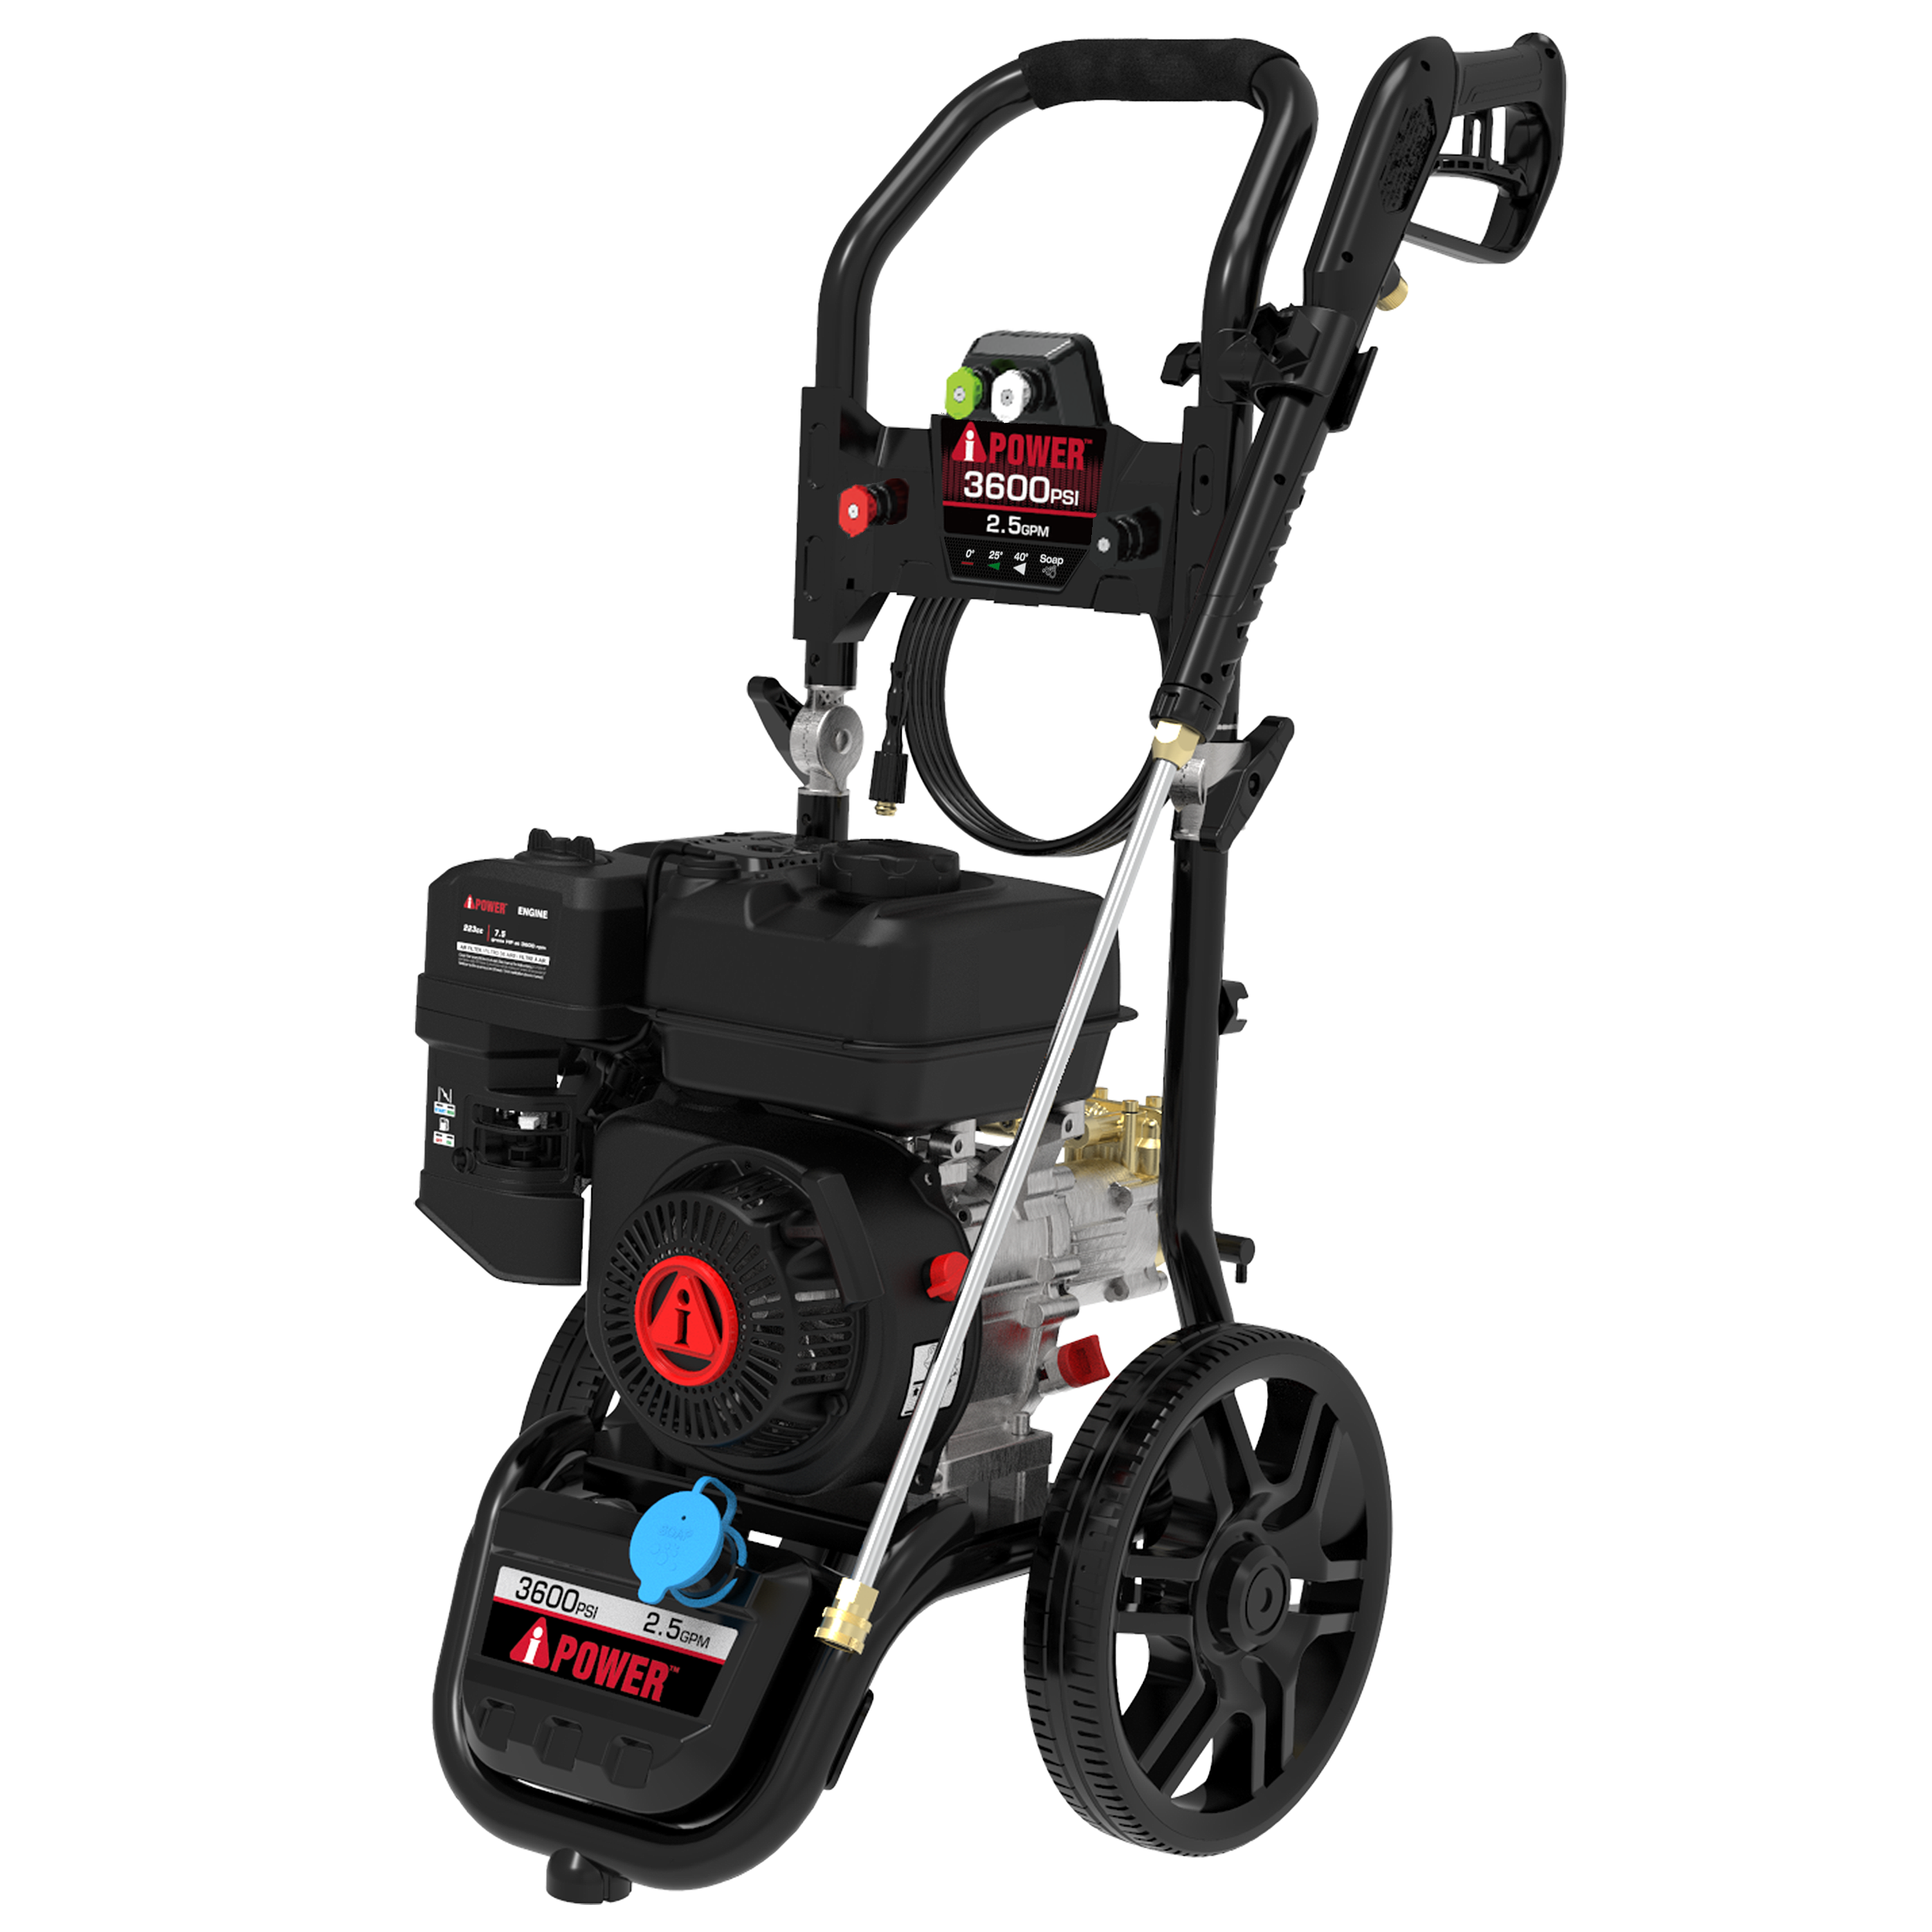 PWF3600SH A-iPower Gas Pressure Washer